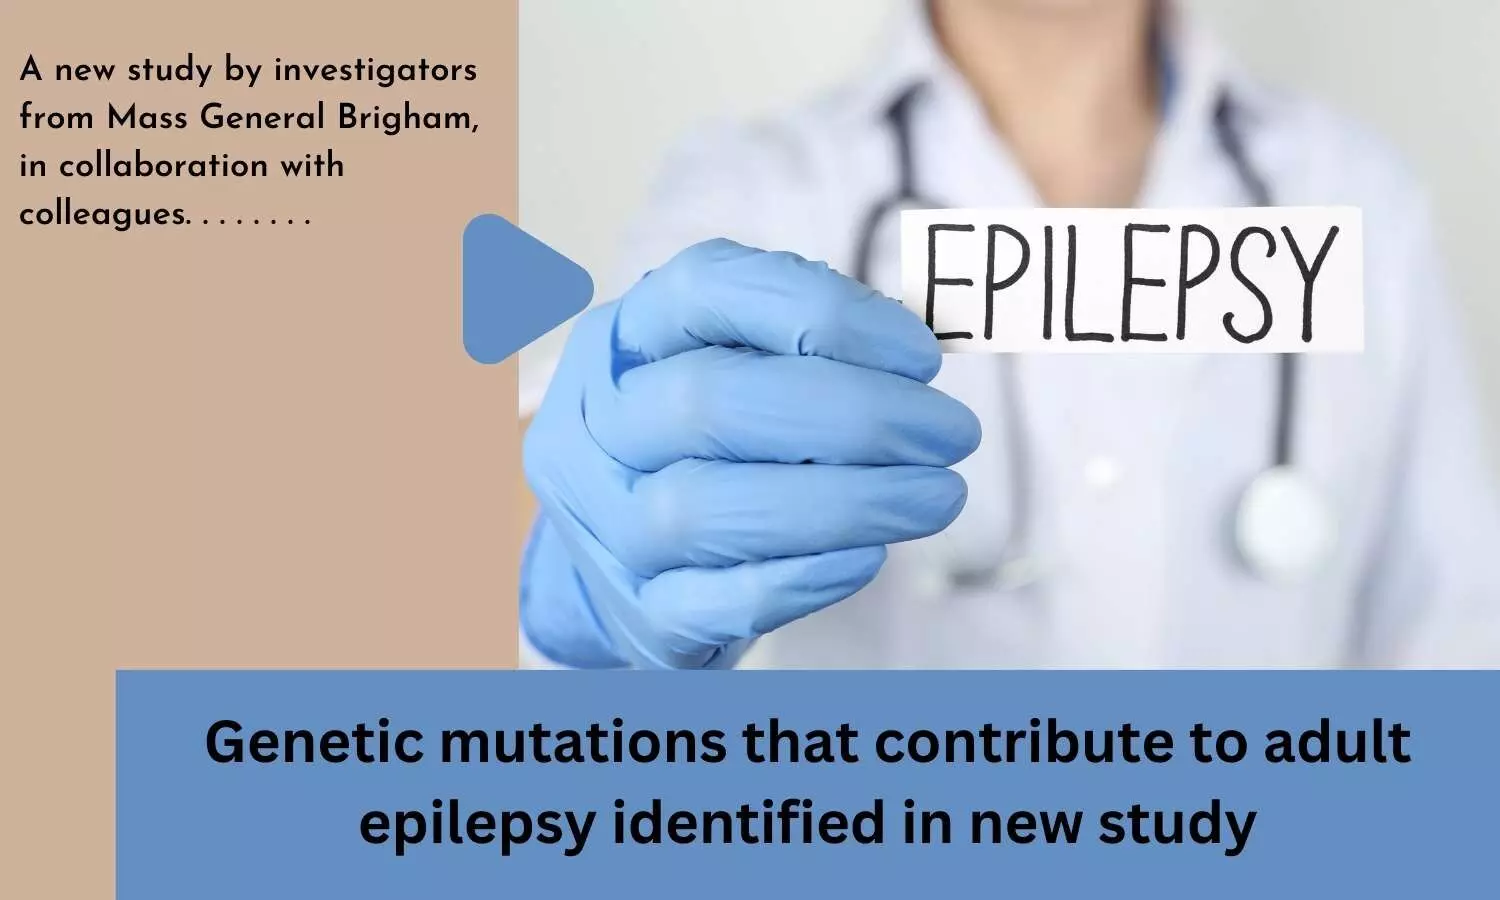 Genetic mutations that contribute to adult epilepsy identified in new study